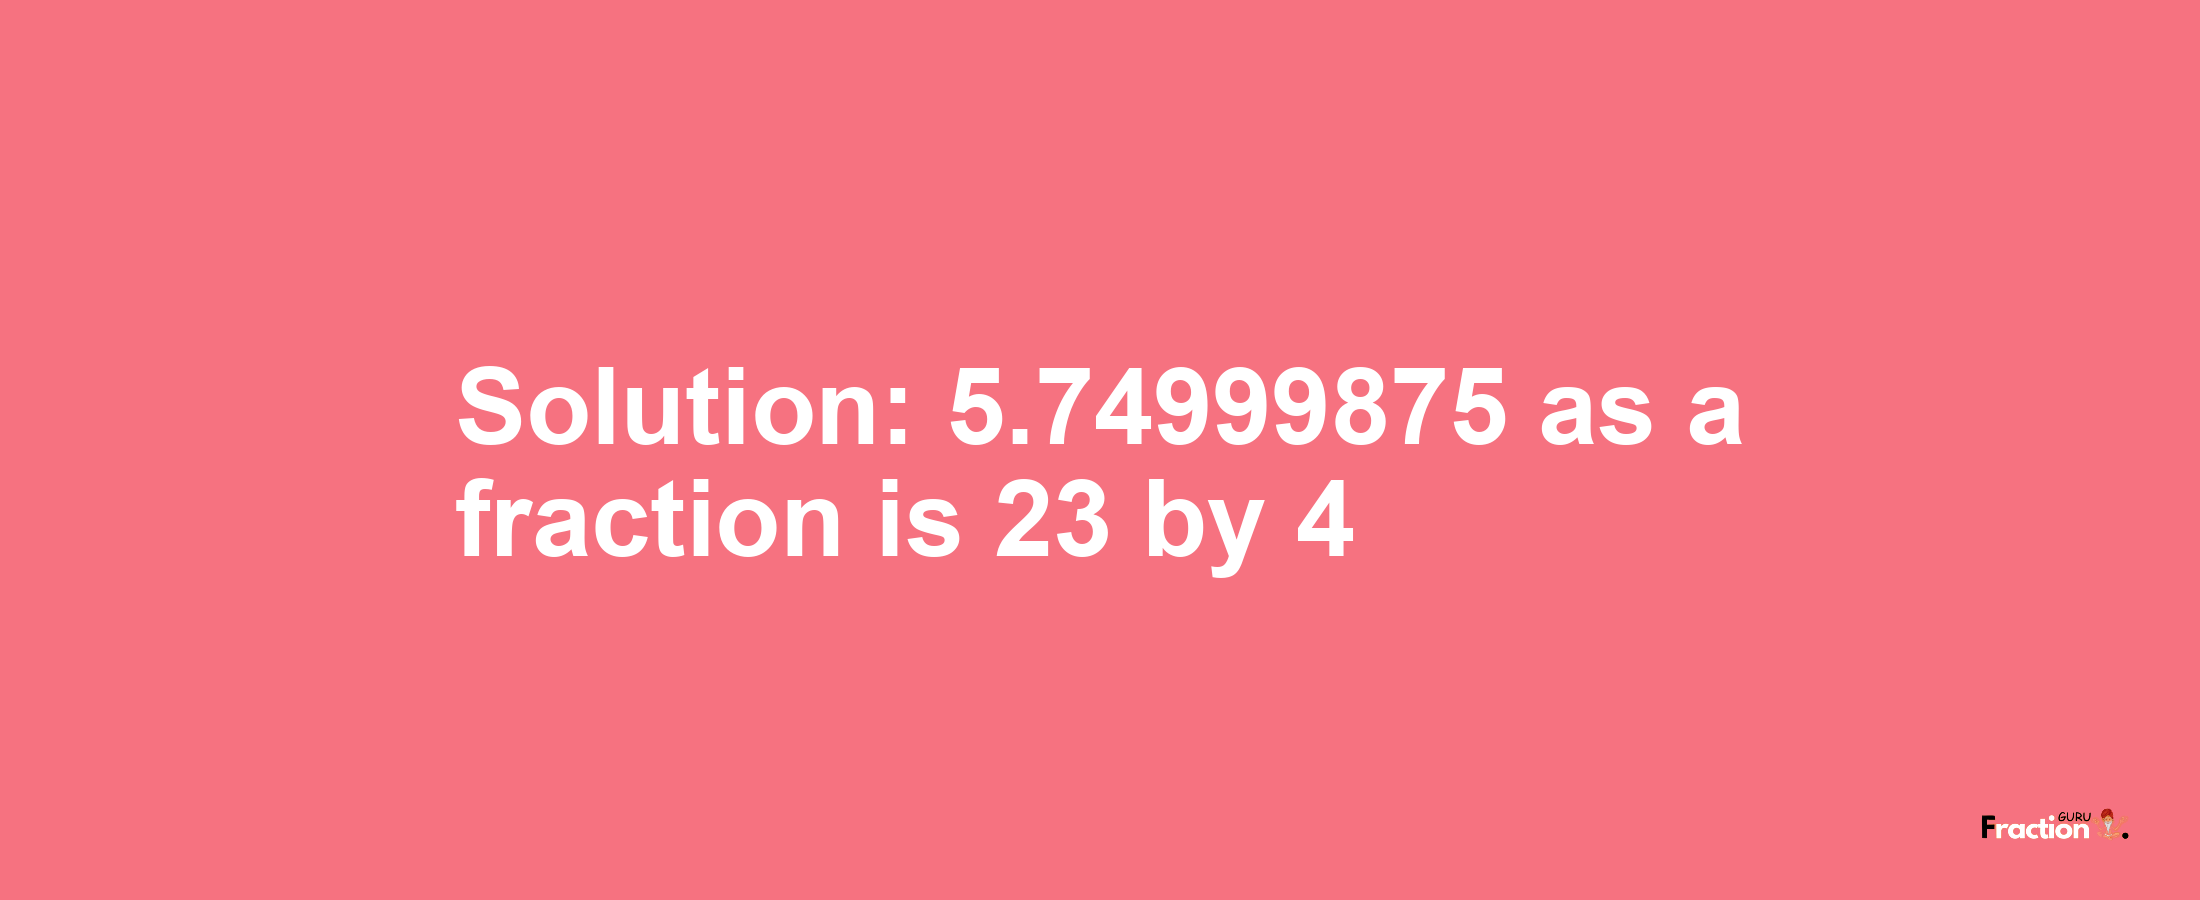 Solution:5.74999875 as a fraction is 23/4